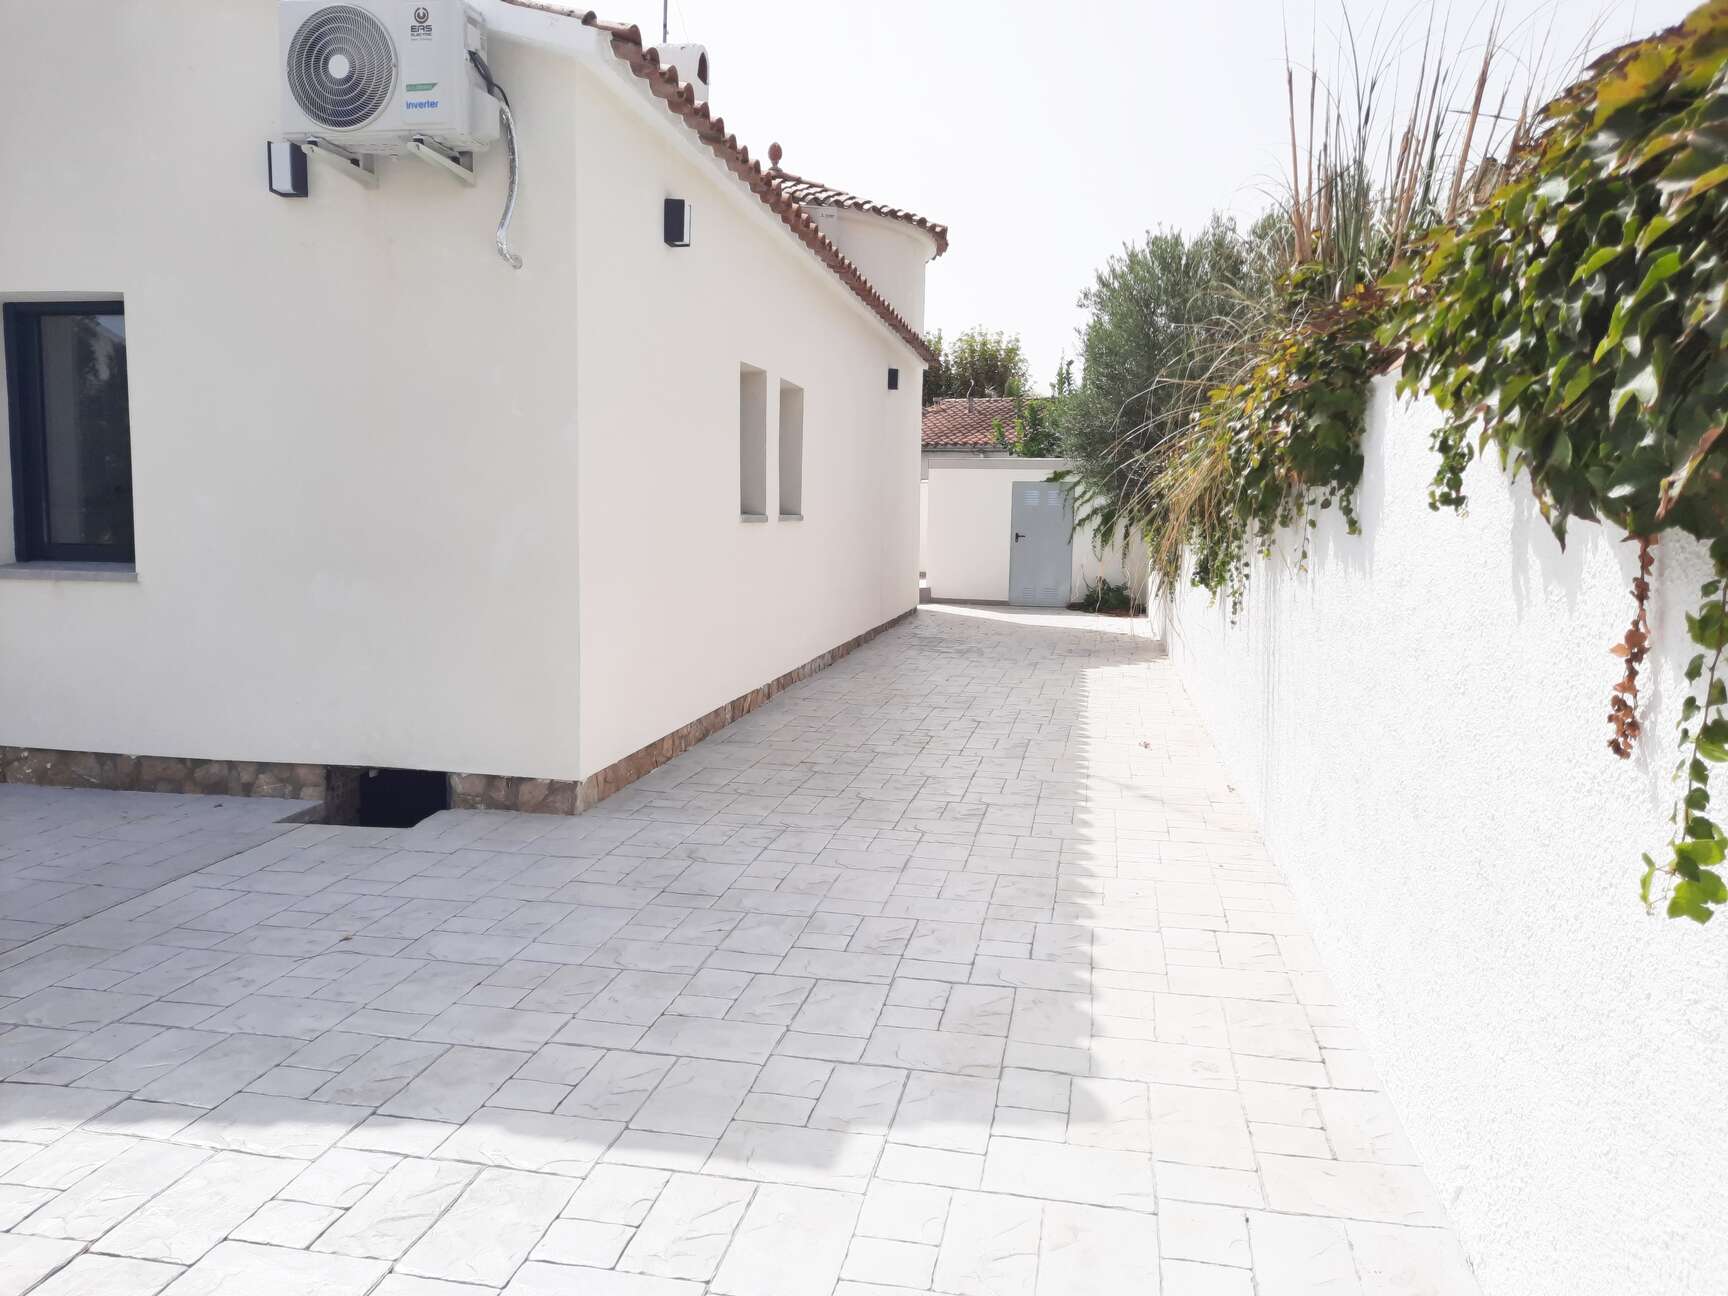 Completely renovated house with pool in Empuriabrava